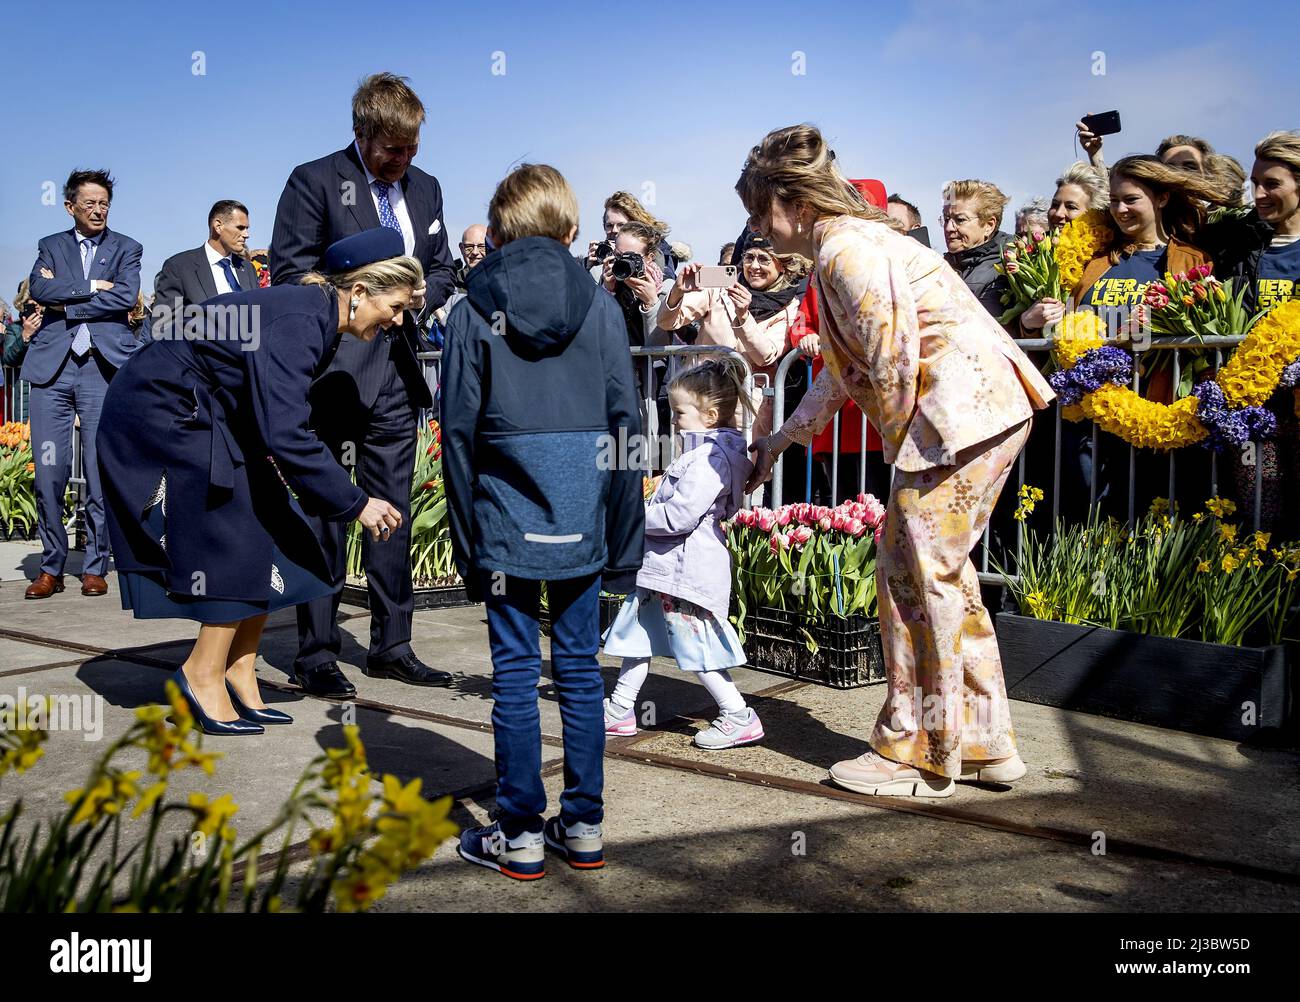 2022-04-07 12:36:23 HILLEGOM - King Willem-Alexander and Queen Maxima visit De Tulip Barn during a regional visit to the Dune and Bulb Region in South Holland. KOEN VAN WEEL netherlands out - belgium out Stock Photo